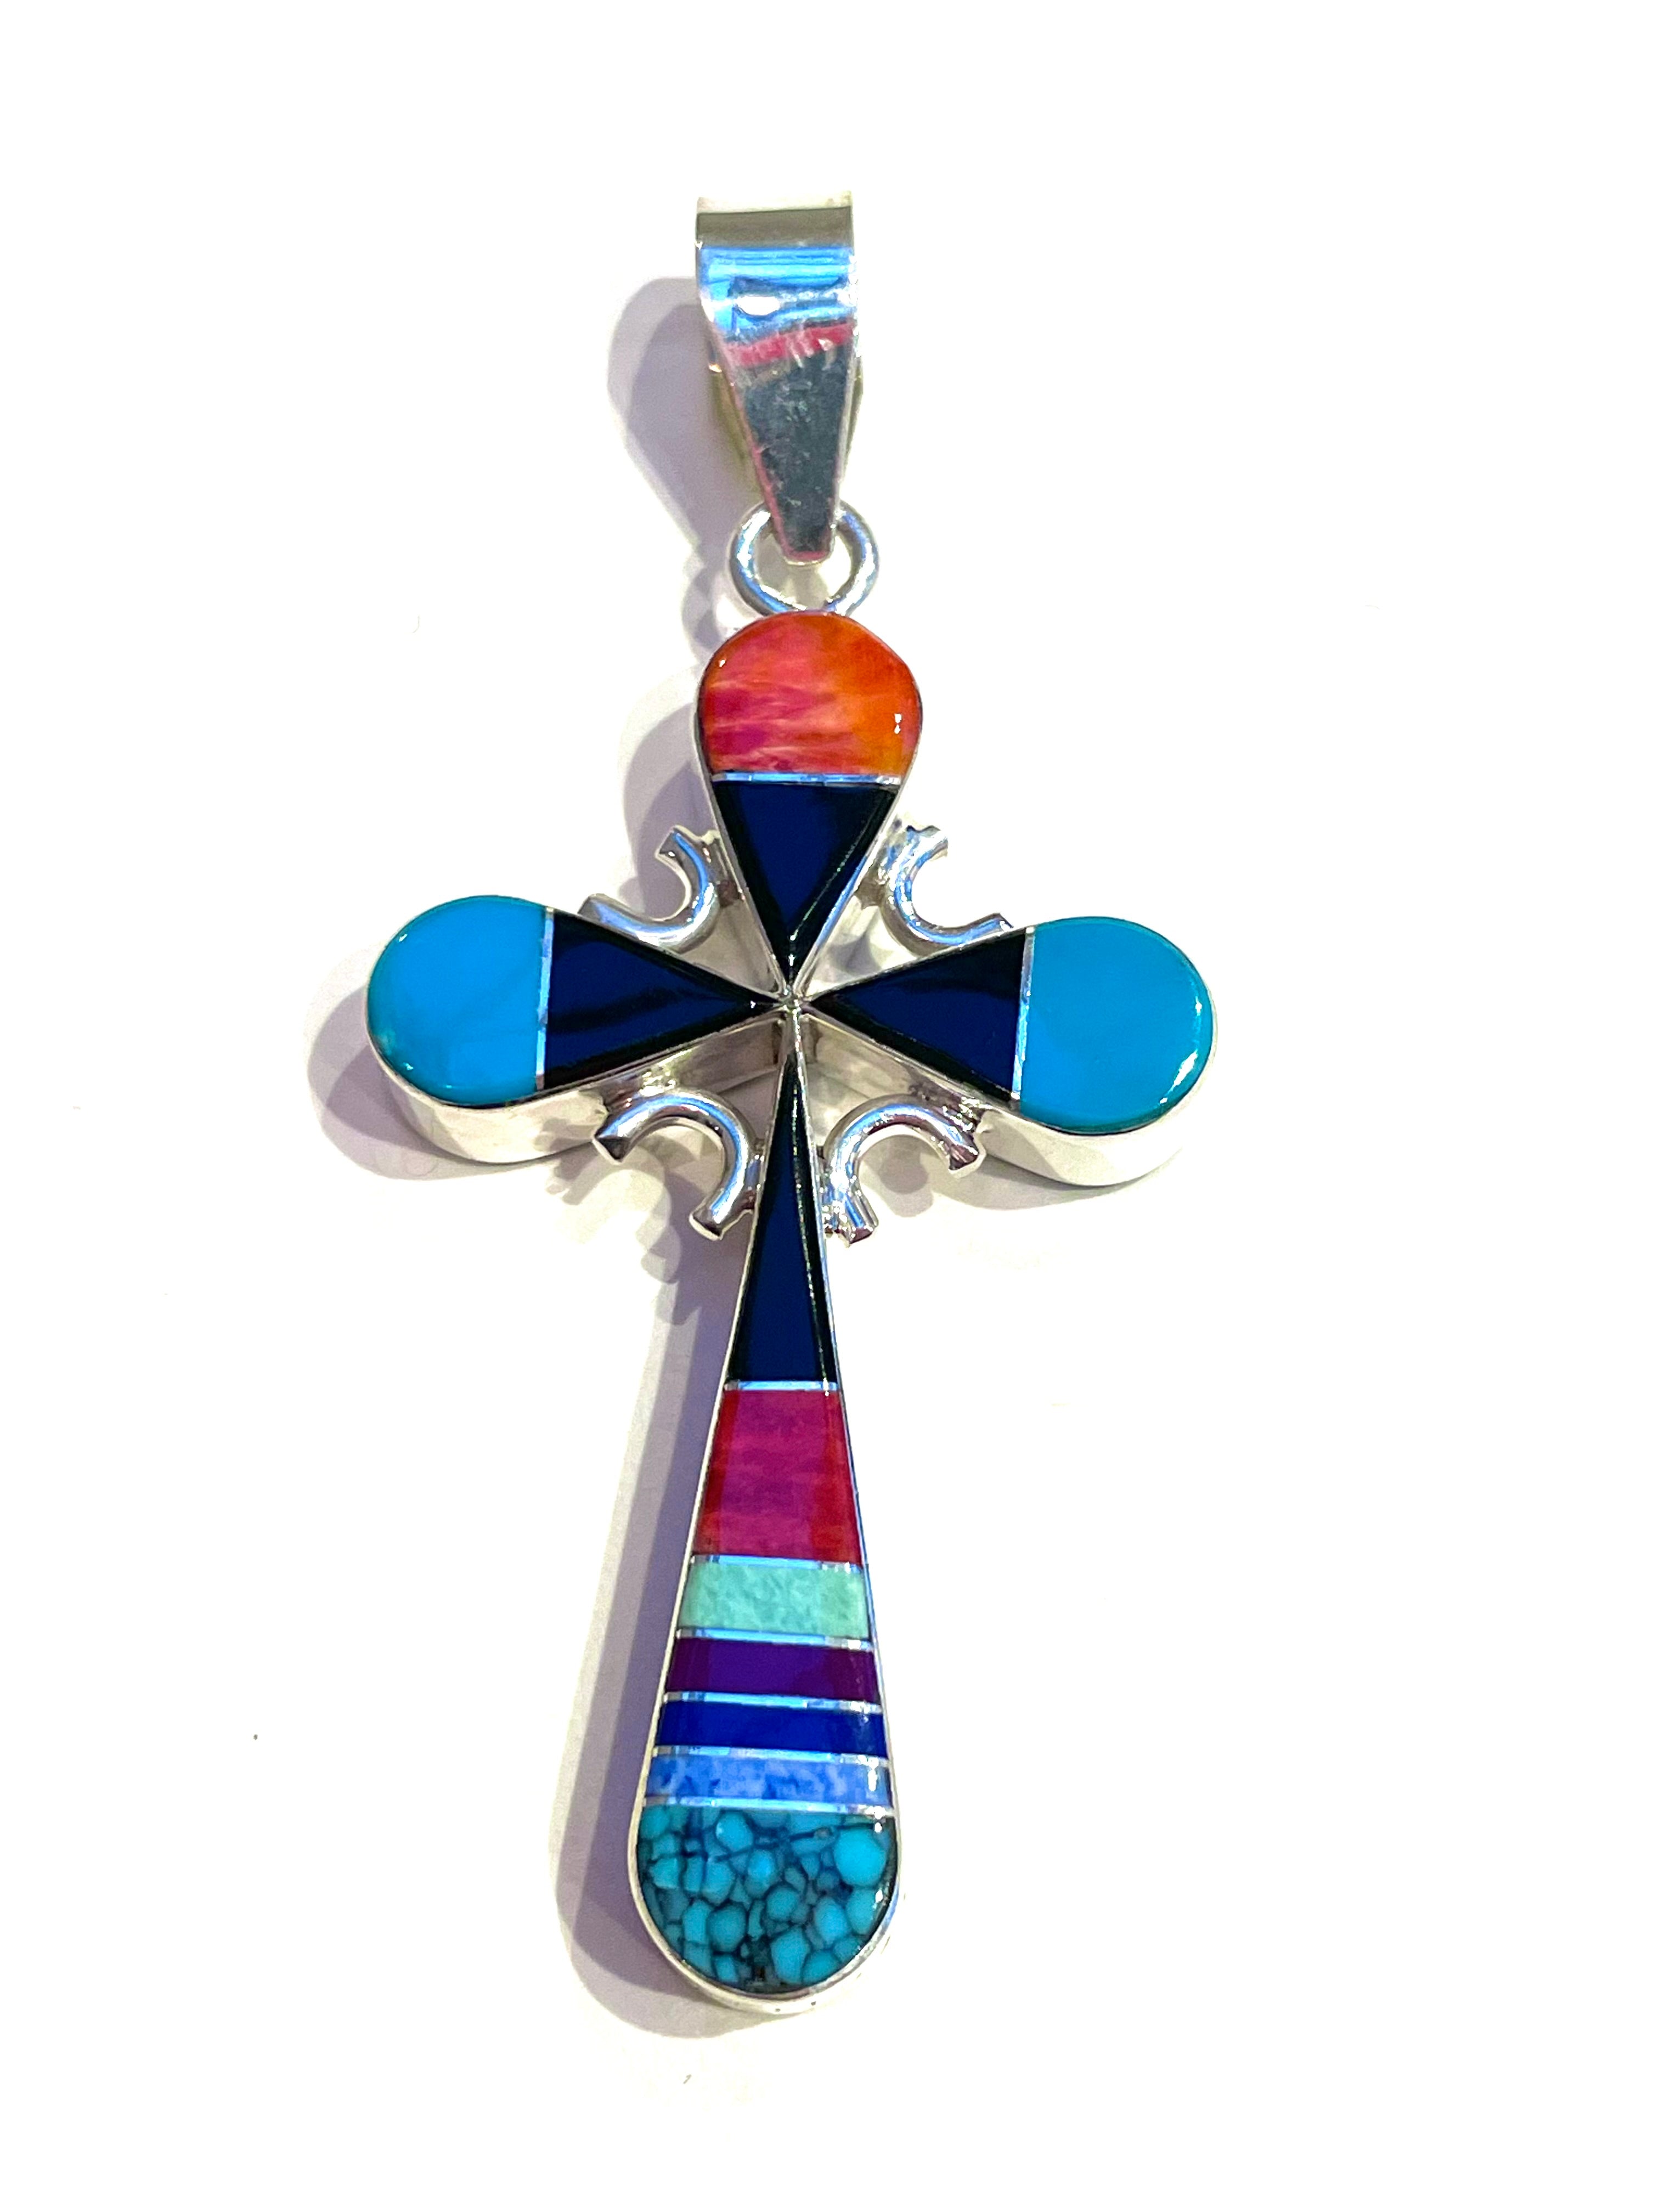 Double sided cross pendent - coral / turquoise